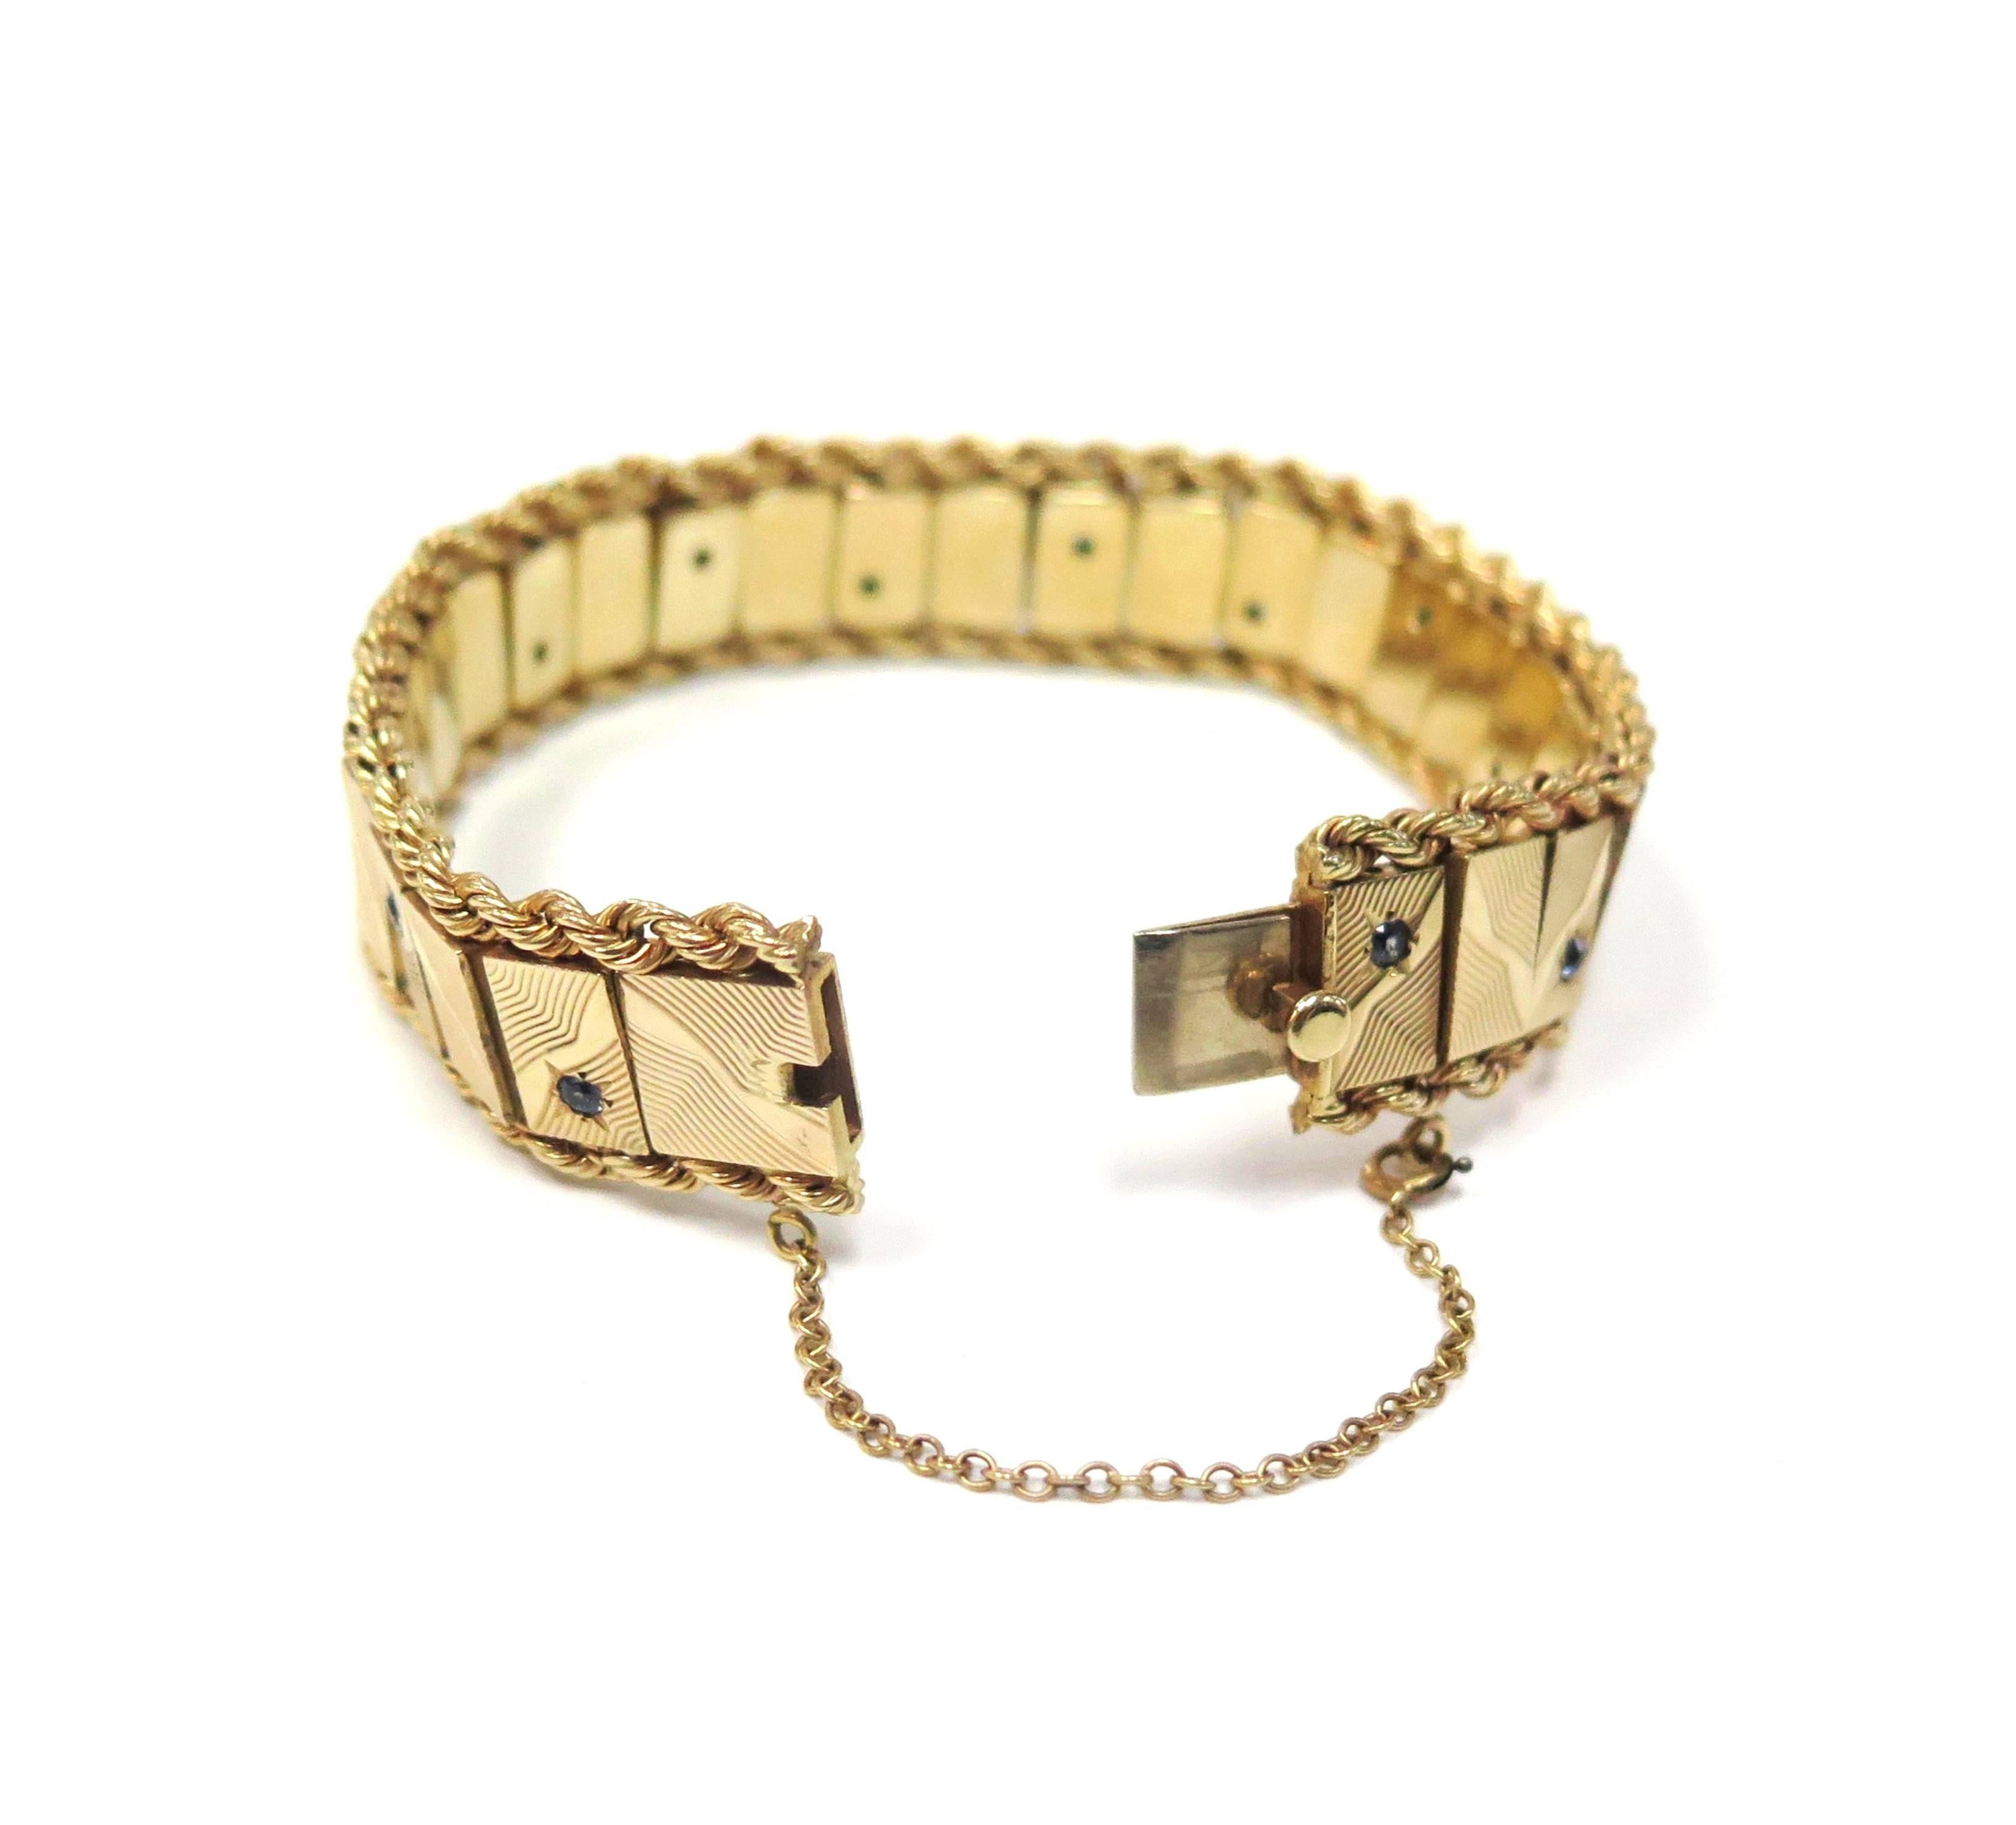 Retro 1950s Bracelet with Sapphires in Faceted Starbursts, 14 Karat Yellow Gold For Sale